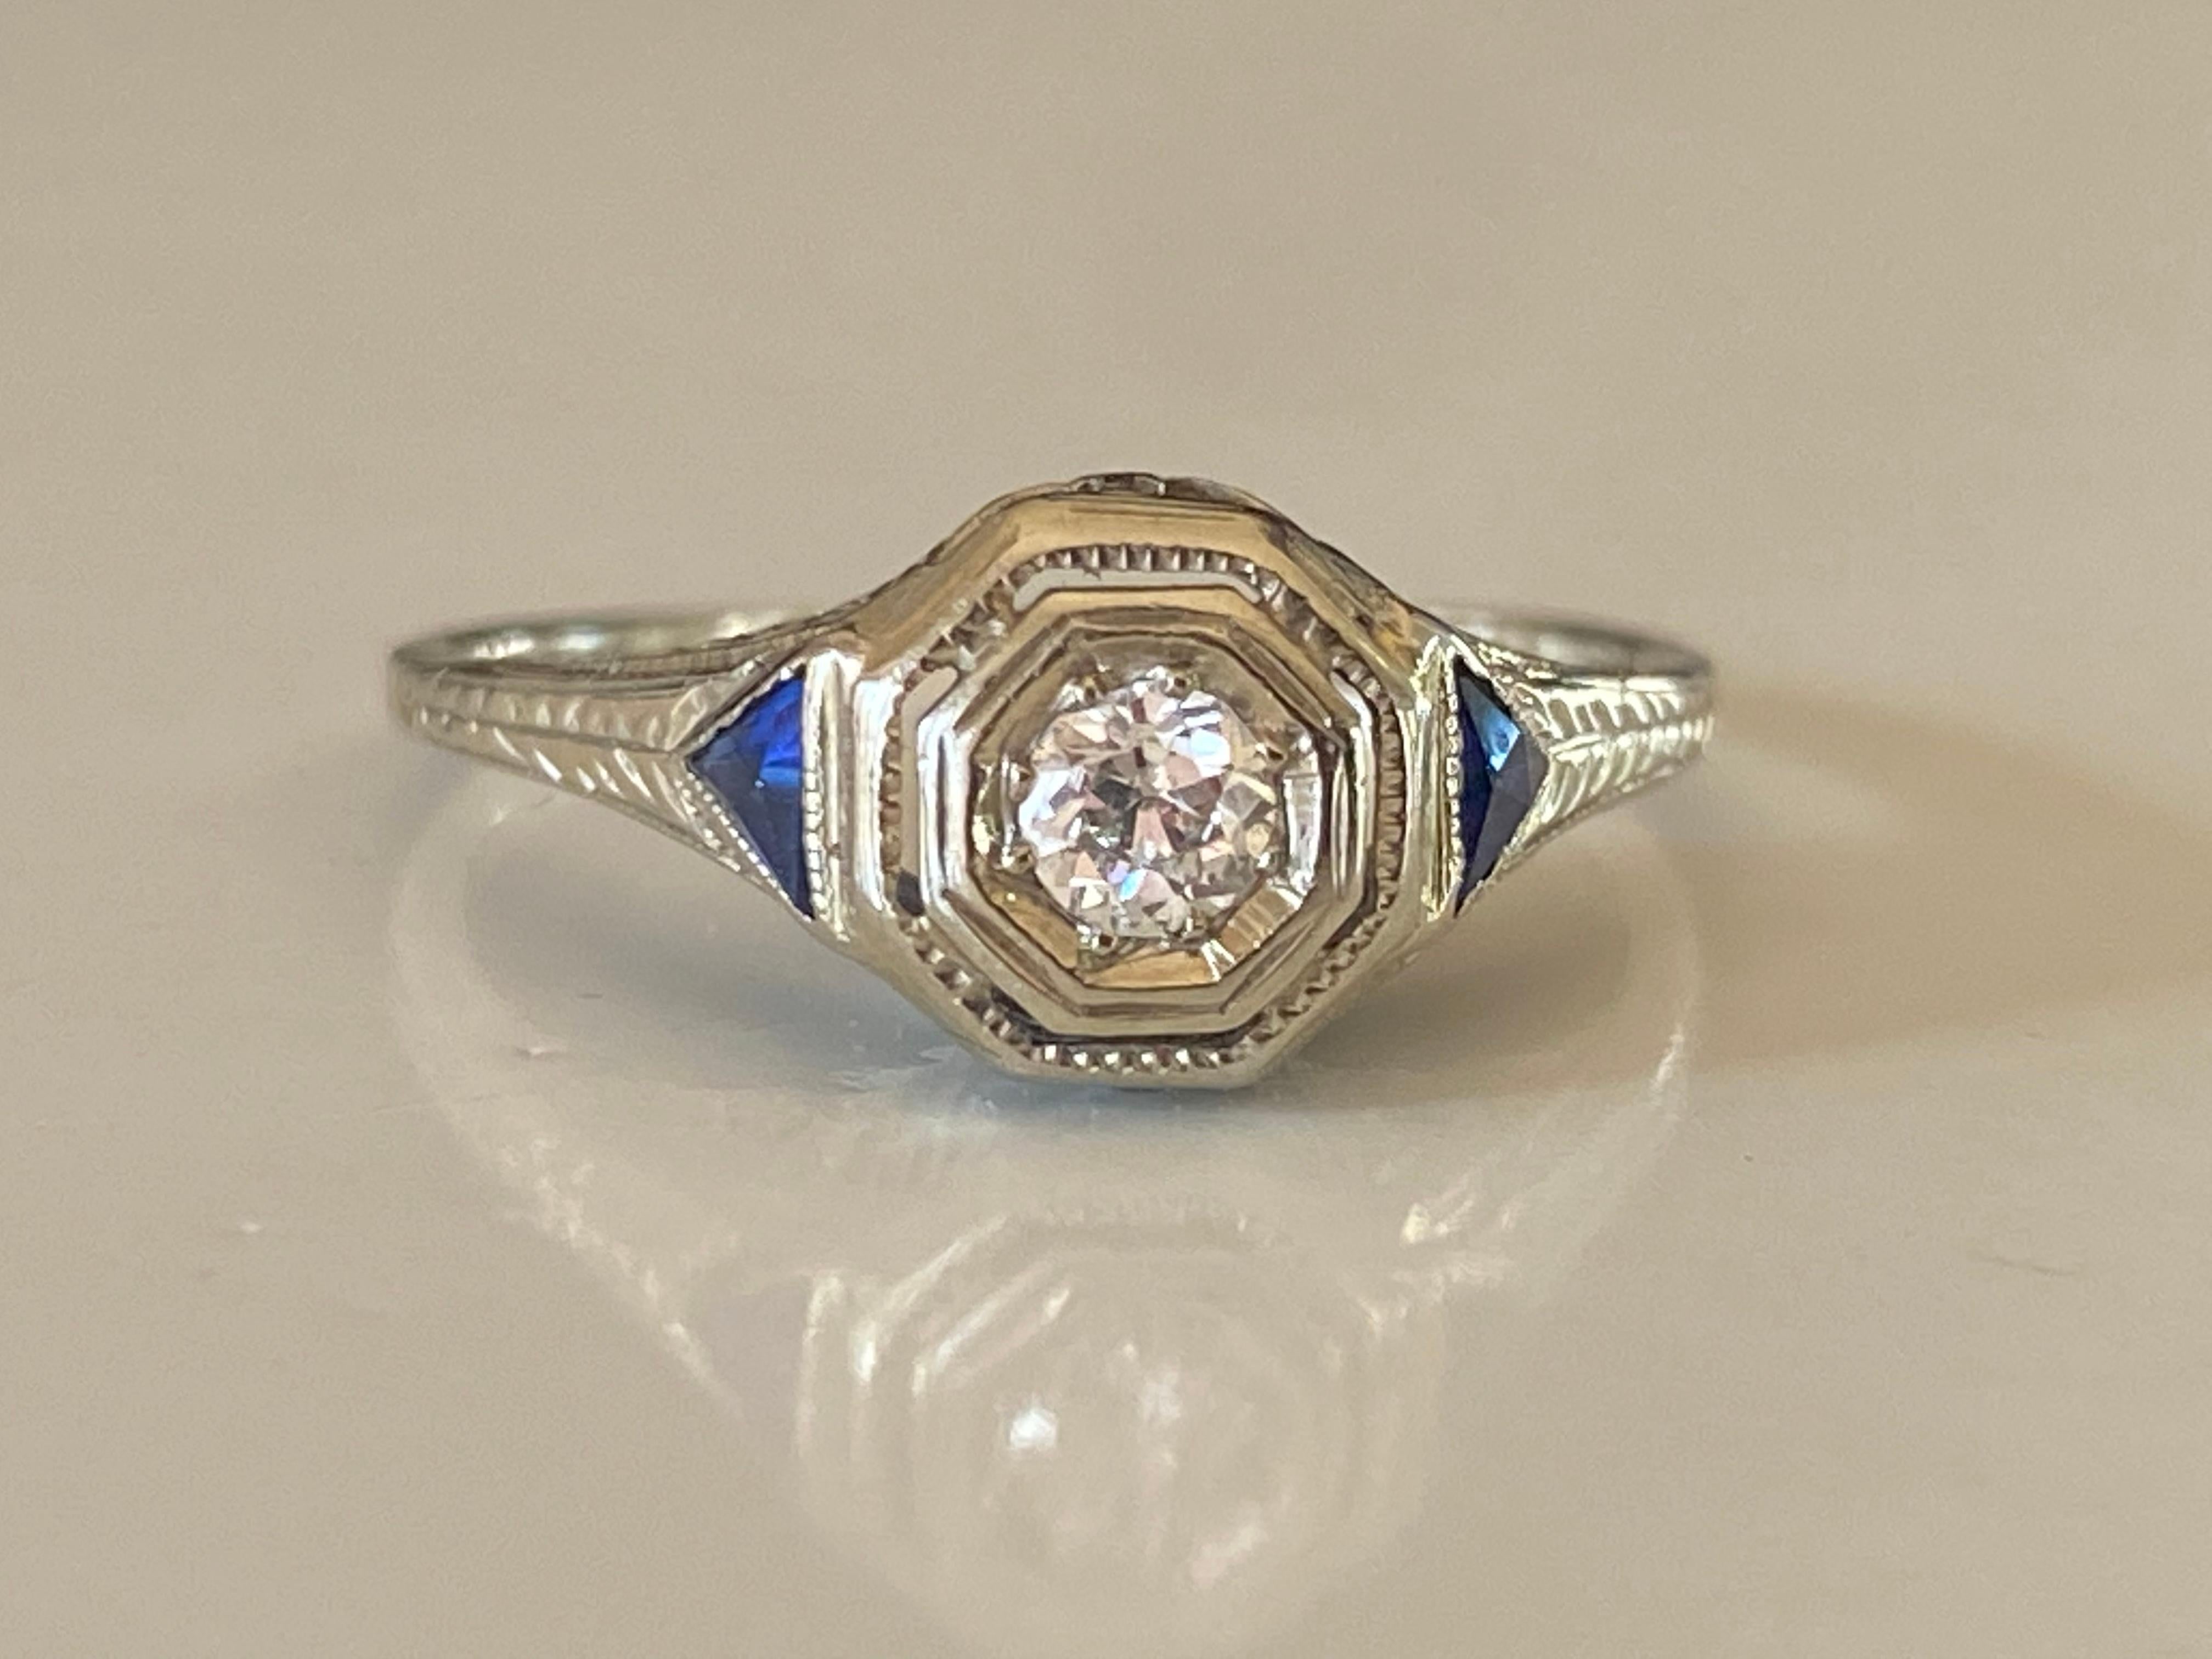 Crafted in the 1920s in 18kt white gold, this classic Art Deco gem is designed around a sparkling Old European cut center stone measuring approximately 0.15 carts, G color, SI1 clarity and complemented with two blue triangle sapphires and intricate